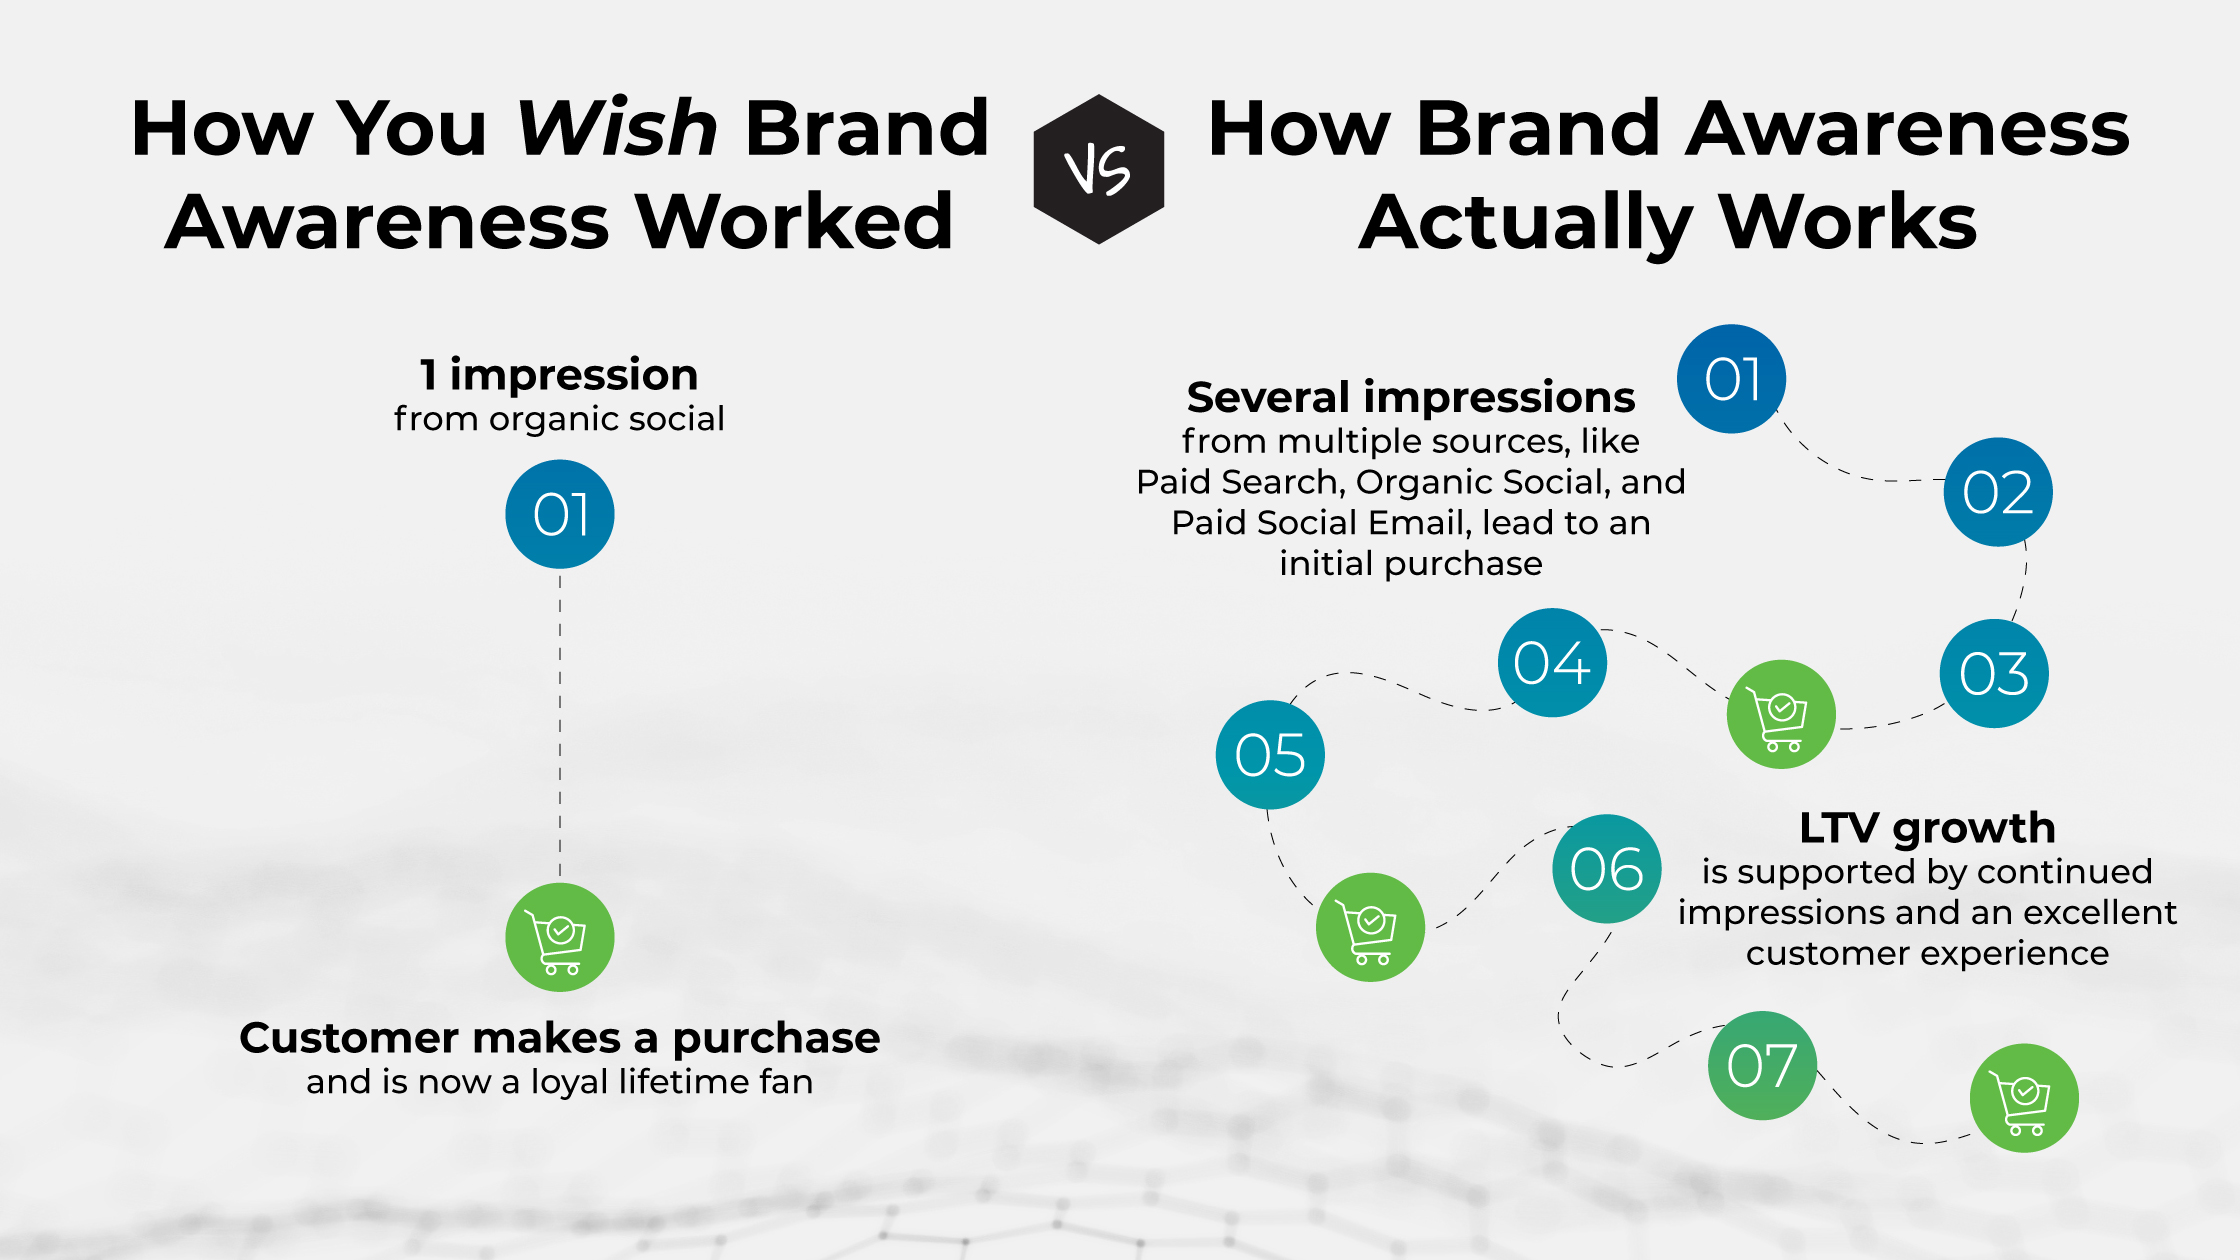 How You Wish Brand Awareness Worked vs. How Brand Awareness Actually Works